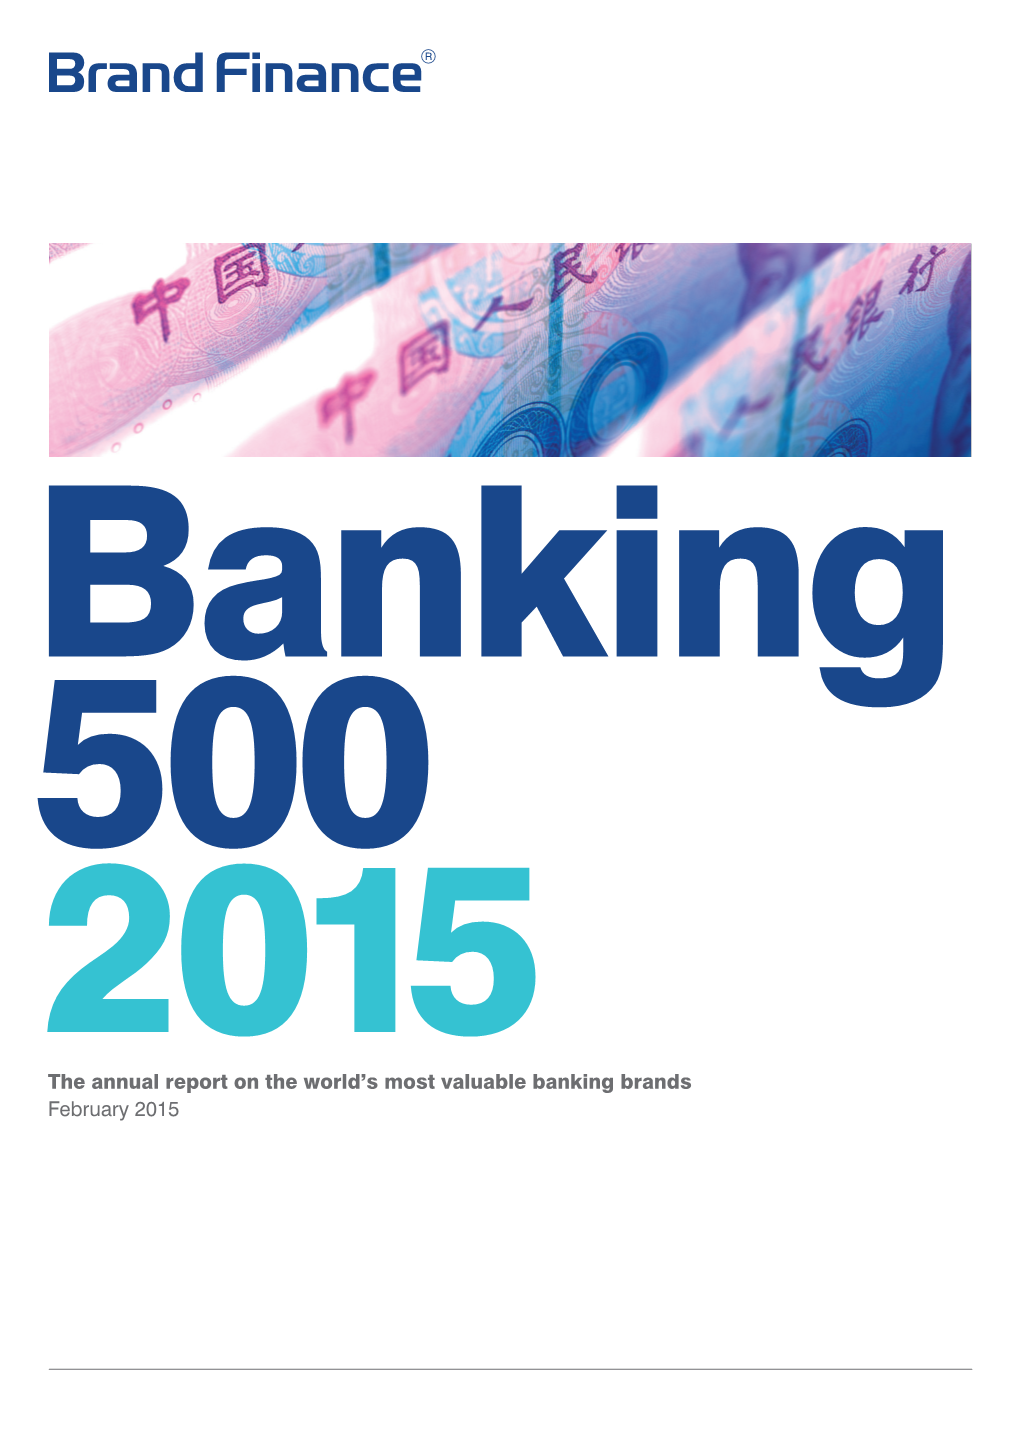 Banking 500 2015 the Annual Report on the World’S Most Valuable Banking Brands February 2015 Contents About Brand Finance